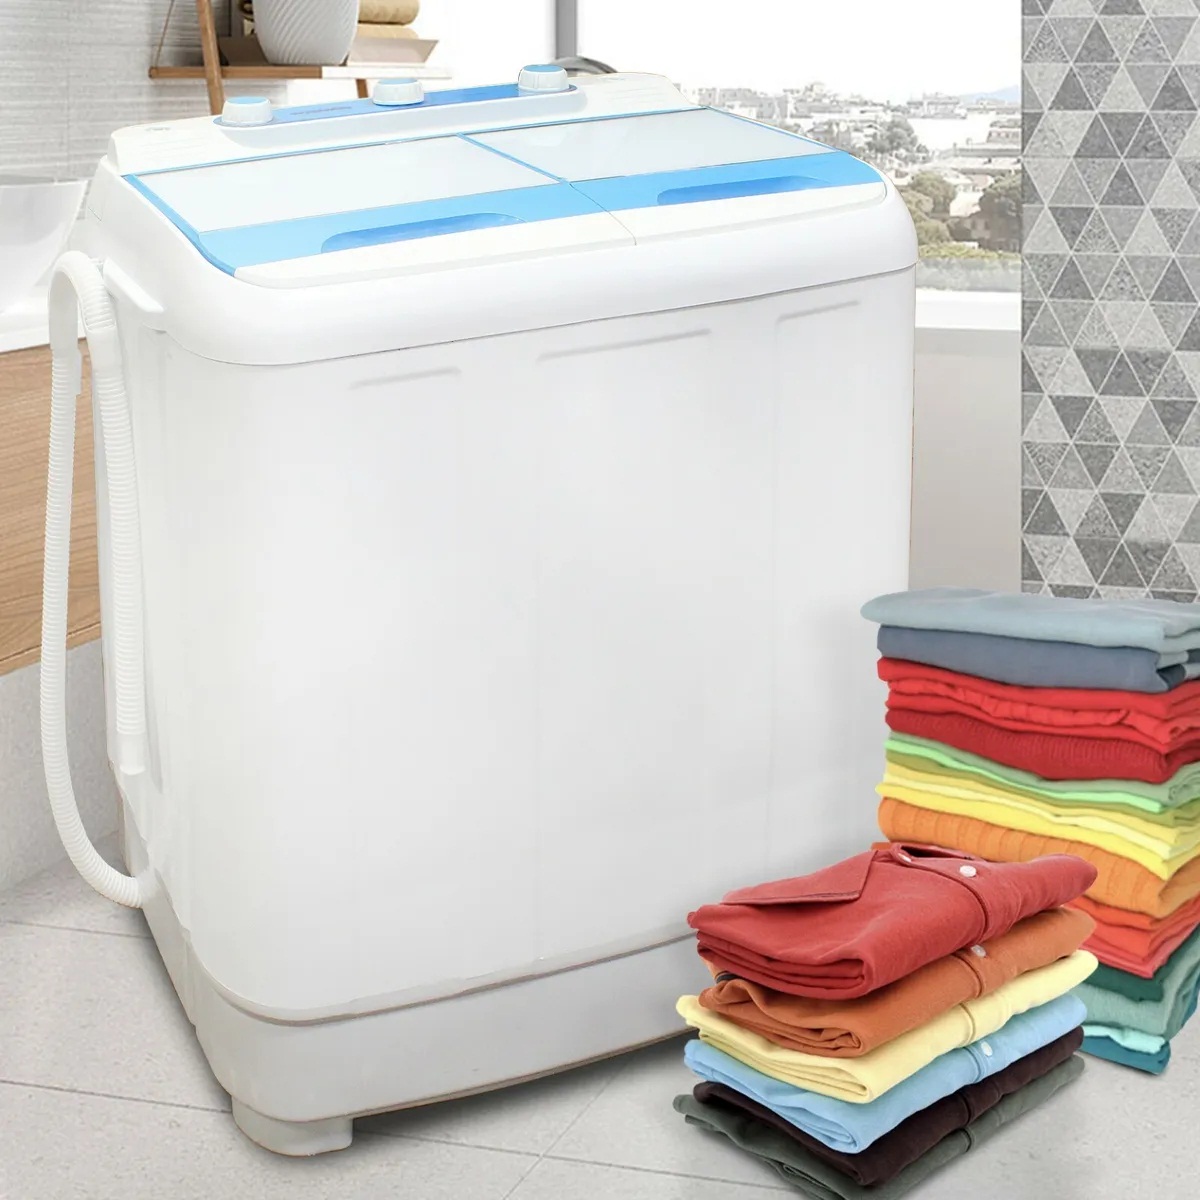 9 Incredible Portable Washing Machine With Spin Dryer For 2023